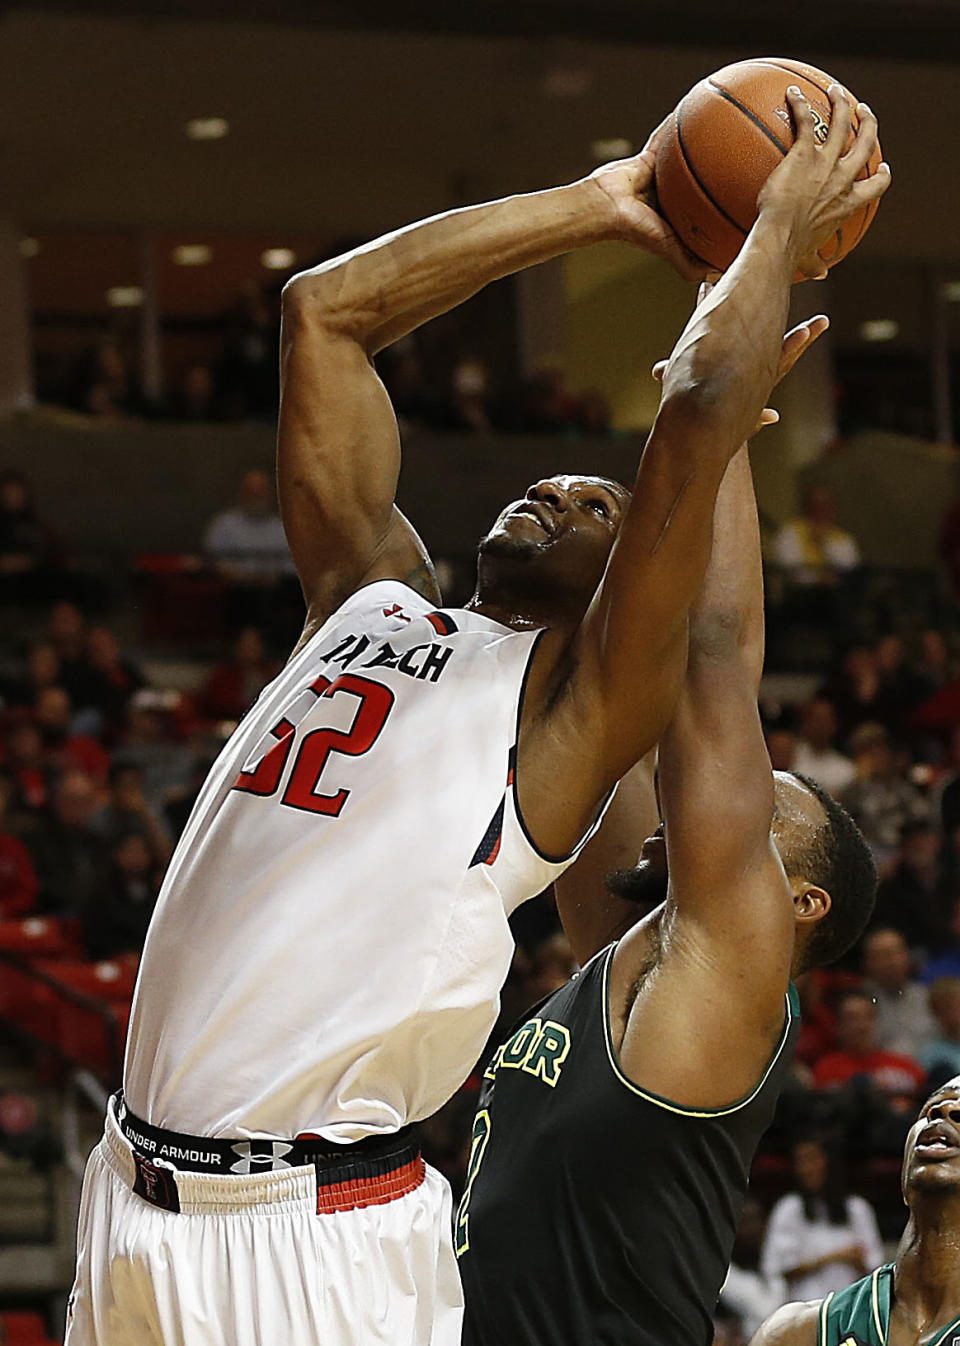 Texas Tech's Jordan Tolbert, left, shoots over Baylor's Rico Gathers during their NCAA college basketball game in Lubbock, Texas, Wednesday, Jan, 15, 2014. (AP Photo/Lubbock Avalanche-Journal, Tori Eichberger) ALL LOCAL TV OUT